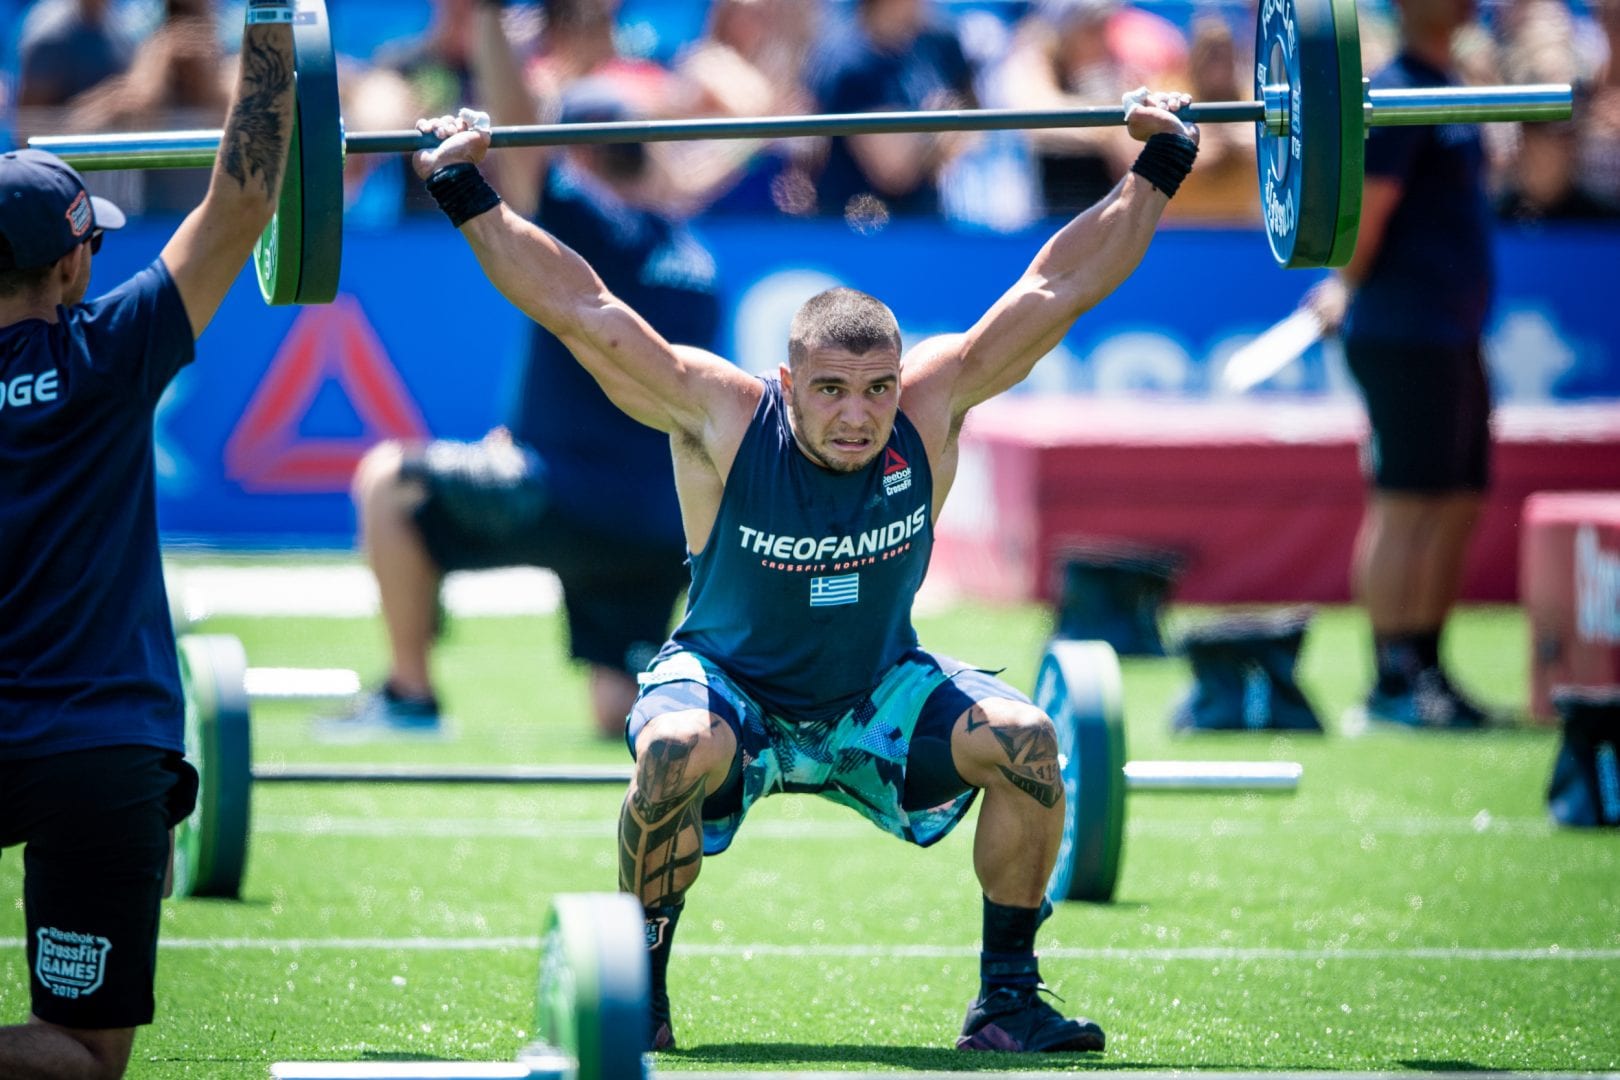 Lefteris Theofanidis, the National Champion of Greece, has tested positive for a banned substance. Photo courtesy of CrossFit.